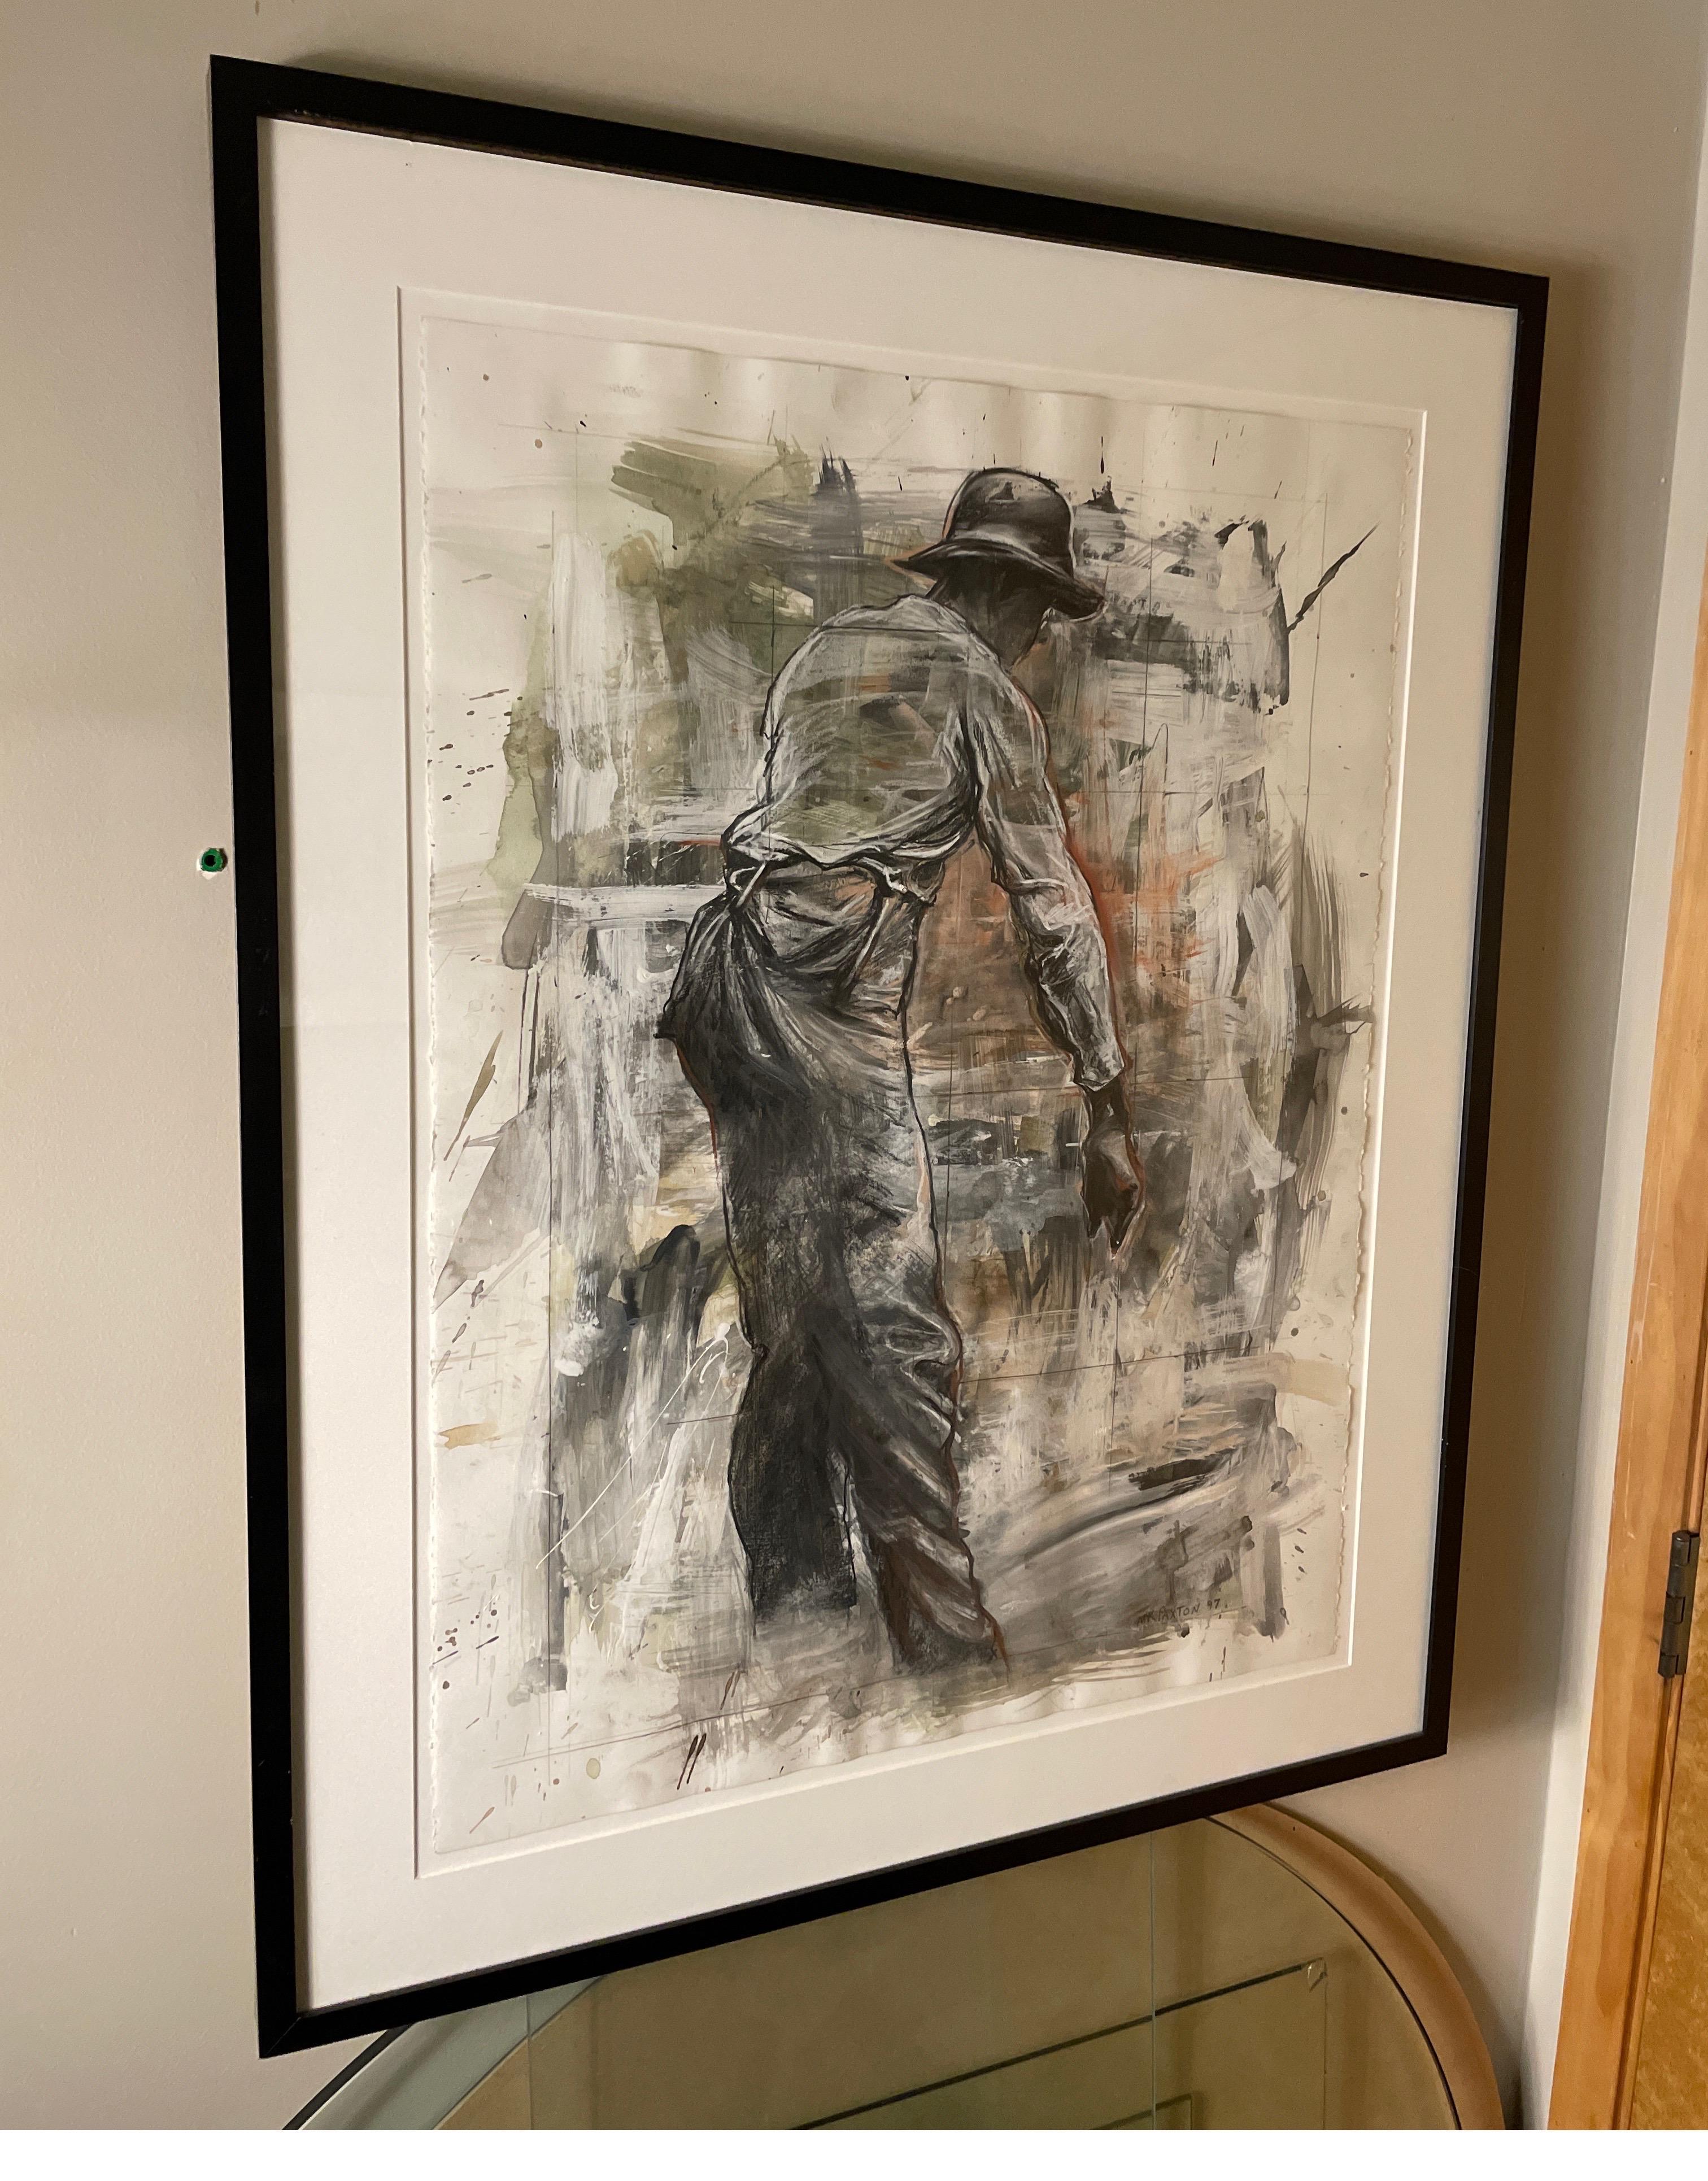 A mixed media (ink, watercolors,charcoal) piece of art by Michael K Paxton’s “worker series”.